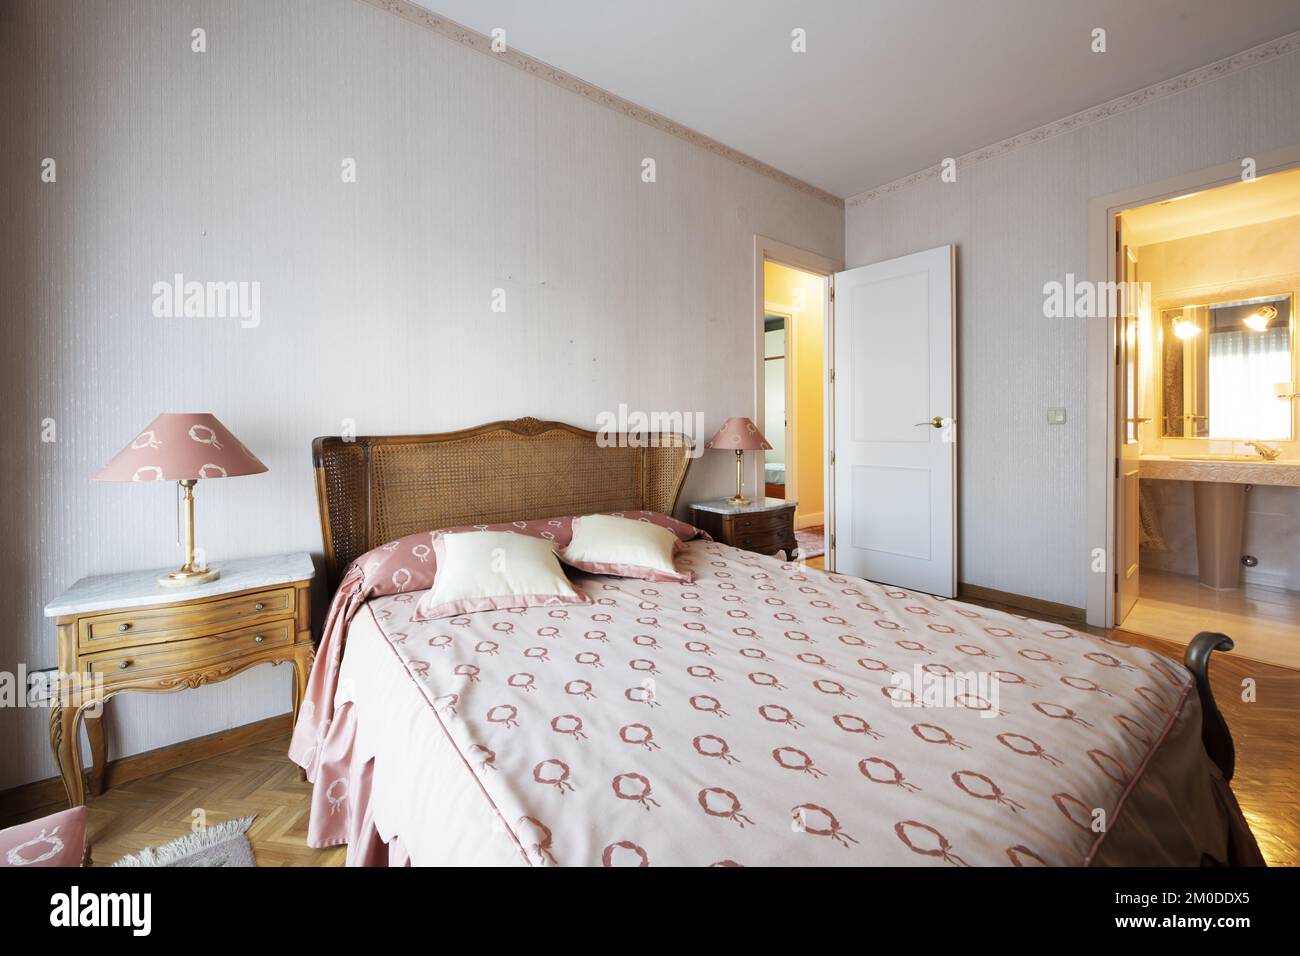 A bedroom with quality antique wooden furniture with a mesh headboard and an en-suite bathroom Stock Photo